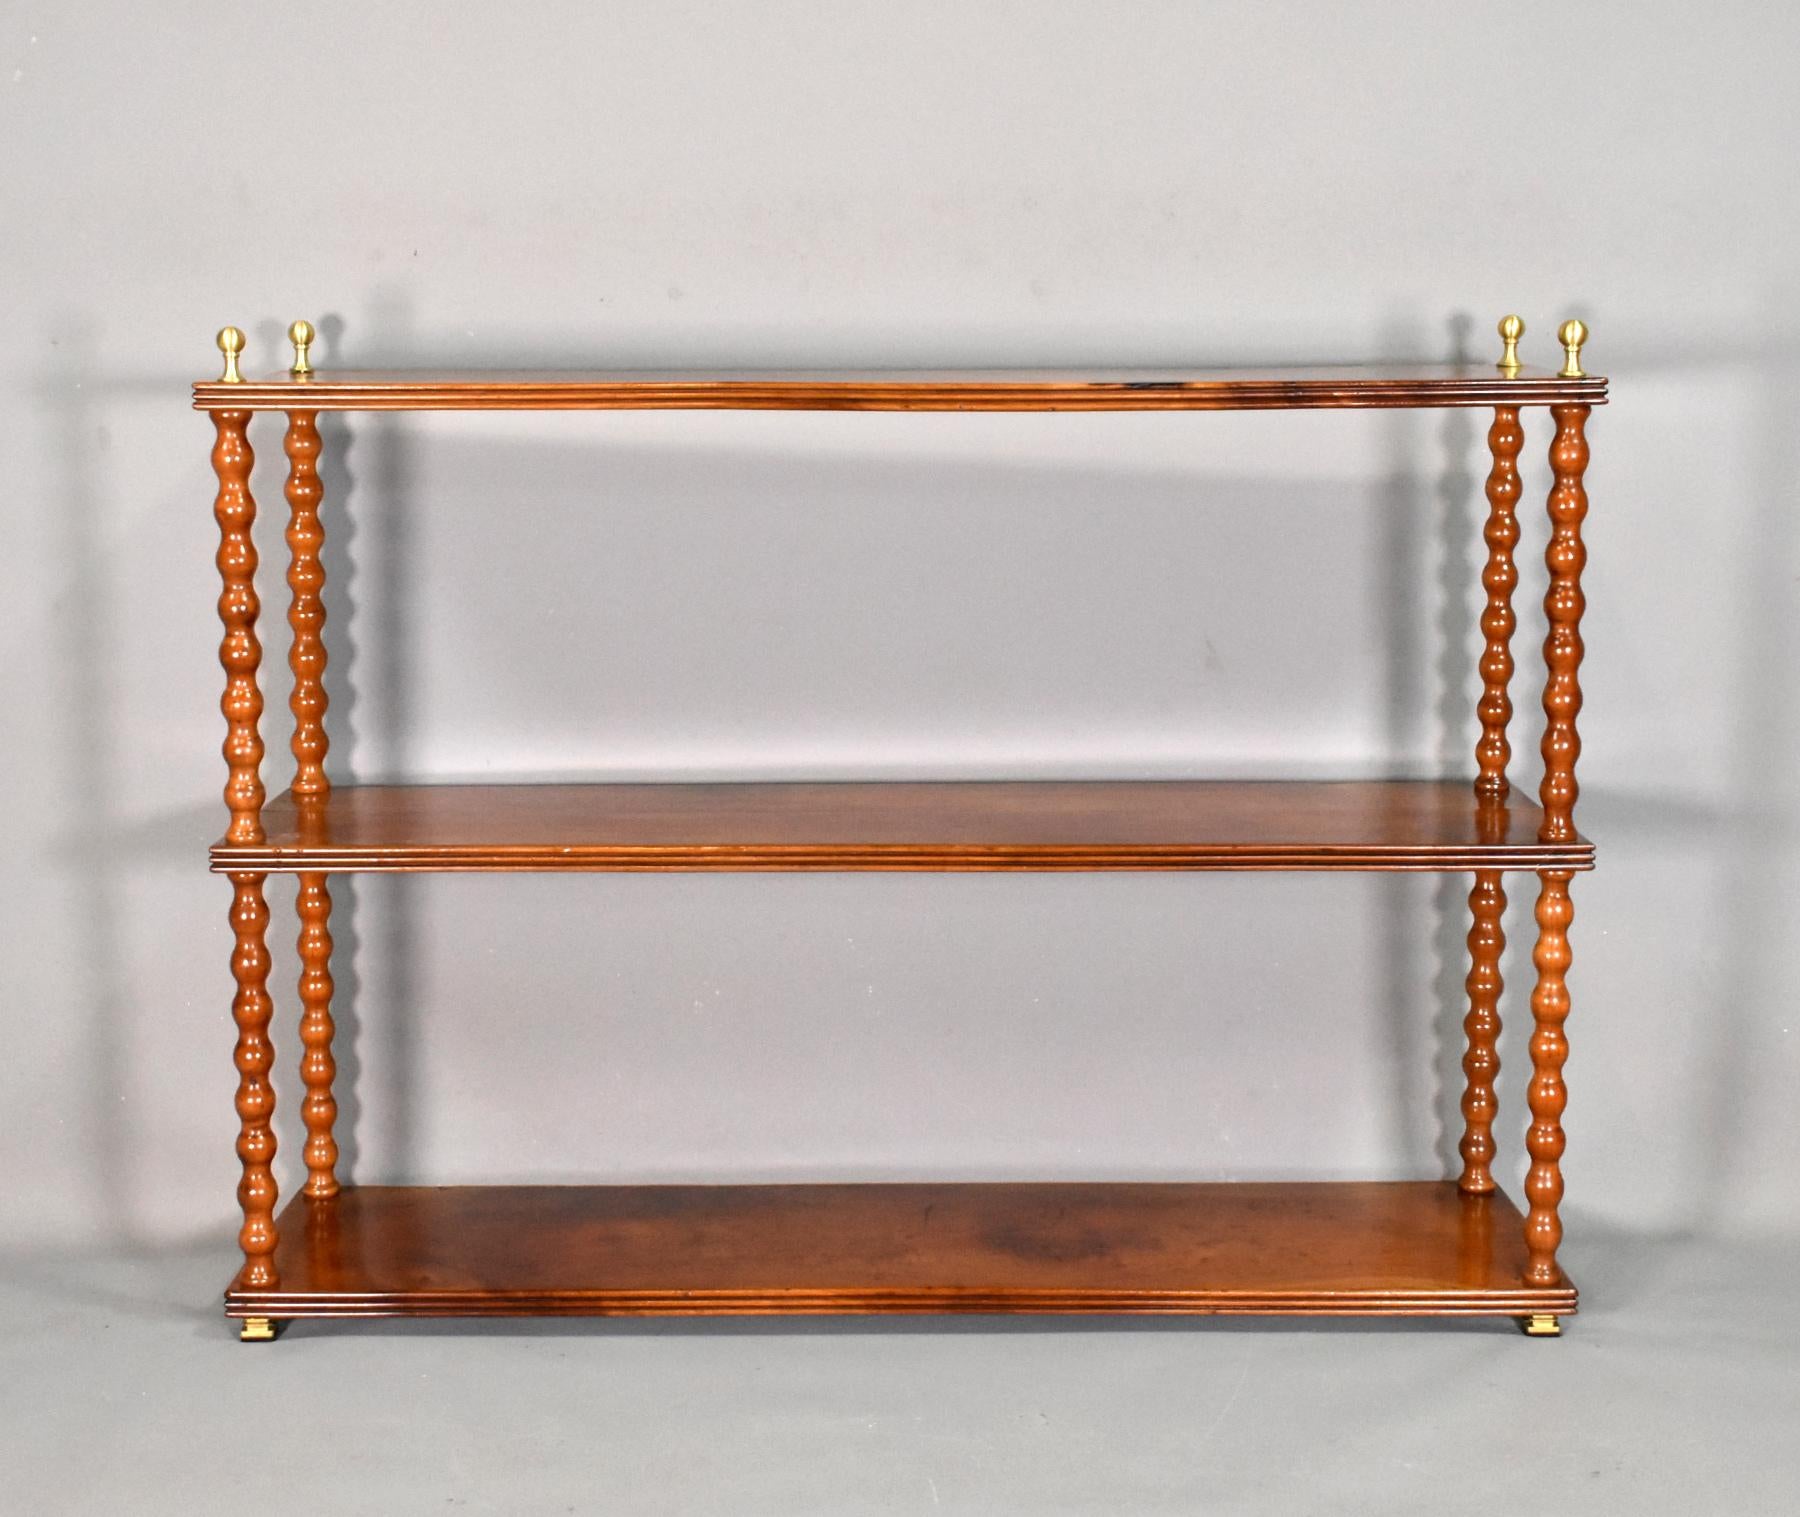 Antique French shelving unit in cherry wood.

This free-standing etagere / shelving unit has three solid cherry wood shelves with beautifully figured wild grain and triple moulded edges to three sides. 

The shelves are separated by